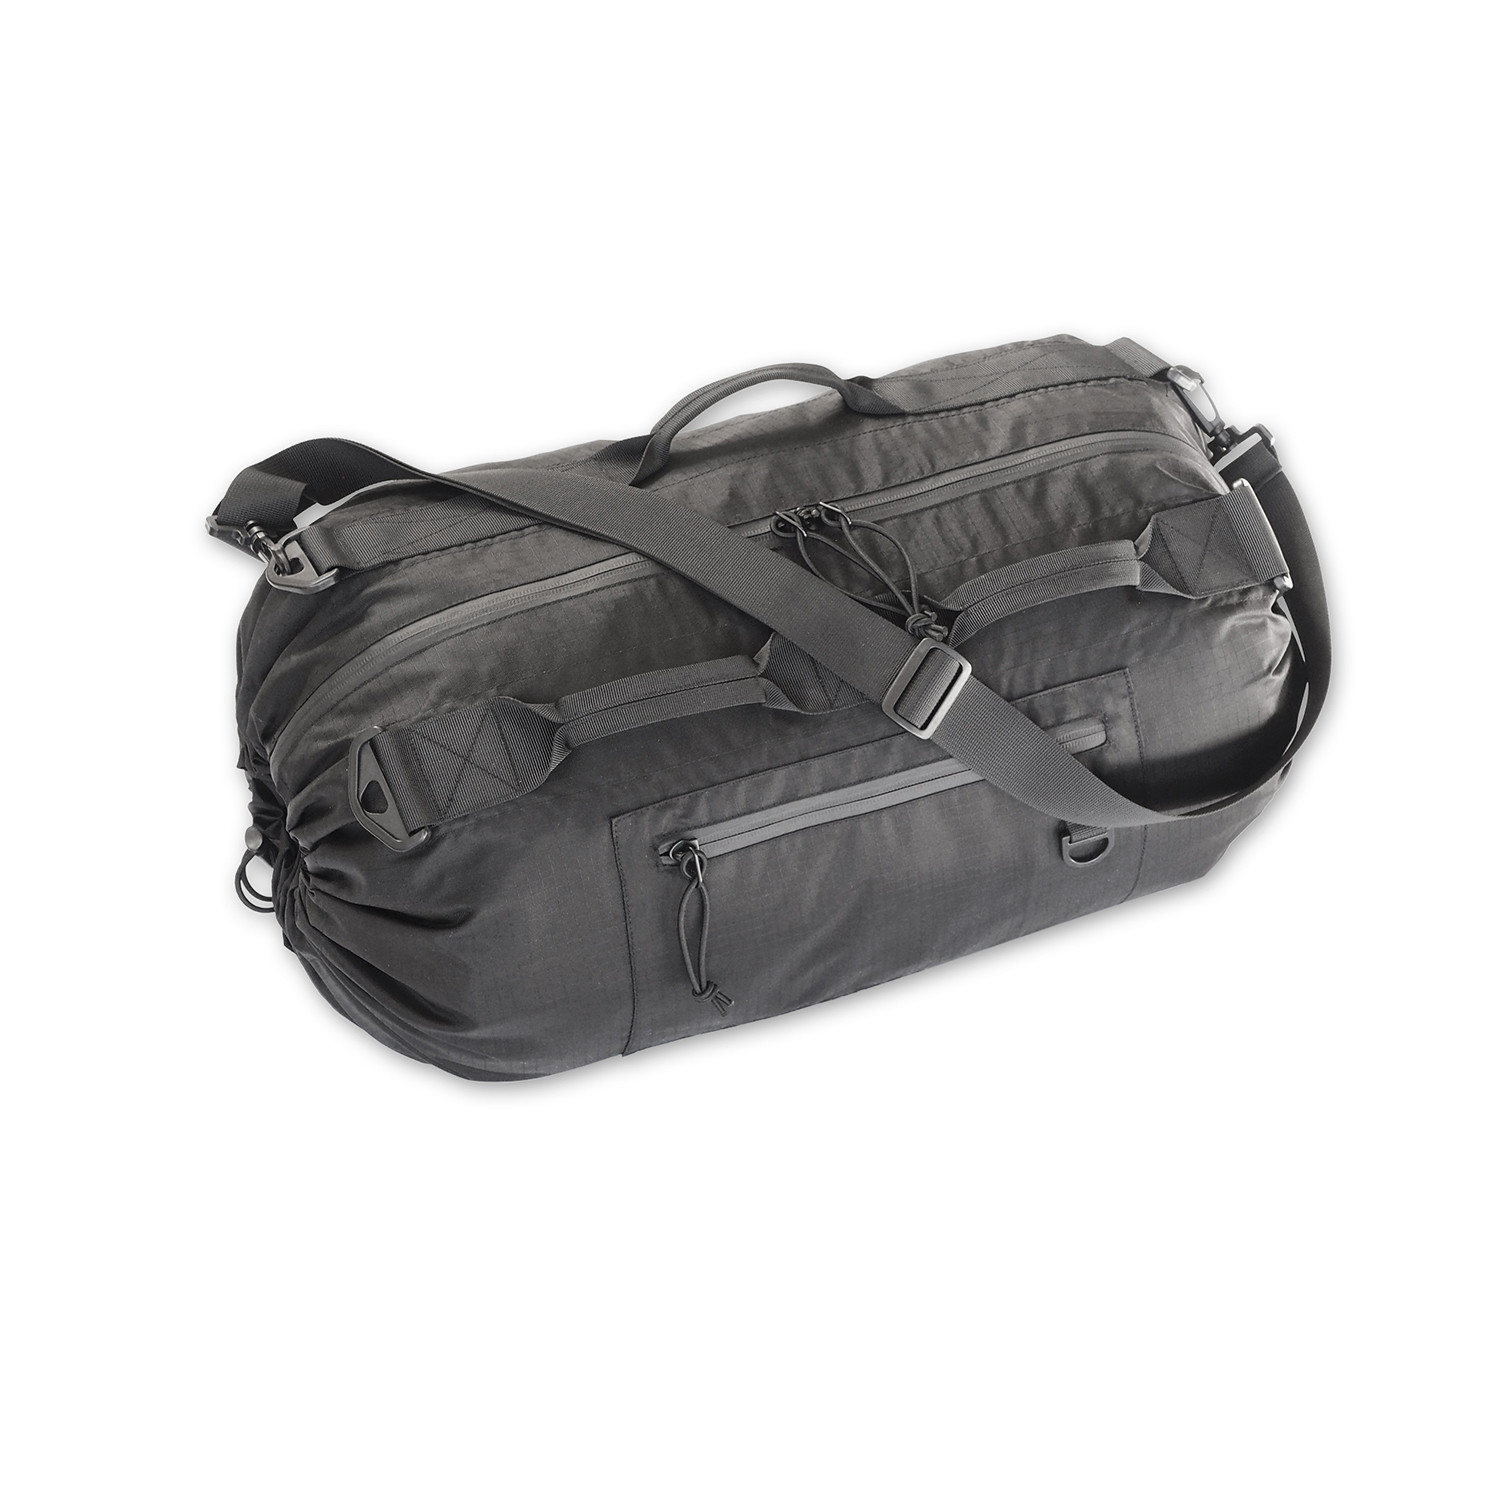 A10 Adjustable Bag (Black) - Piorama - Touch of Modern